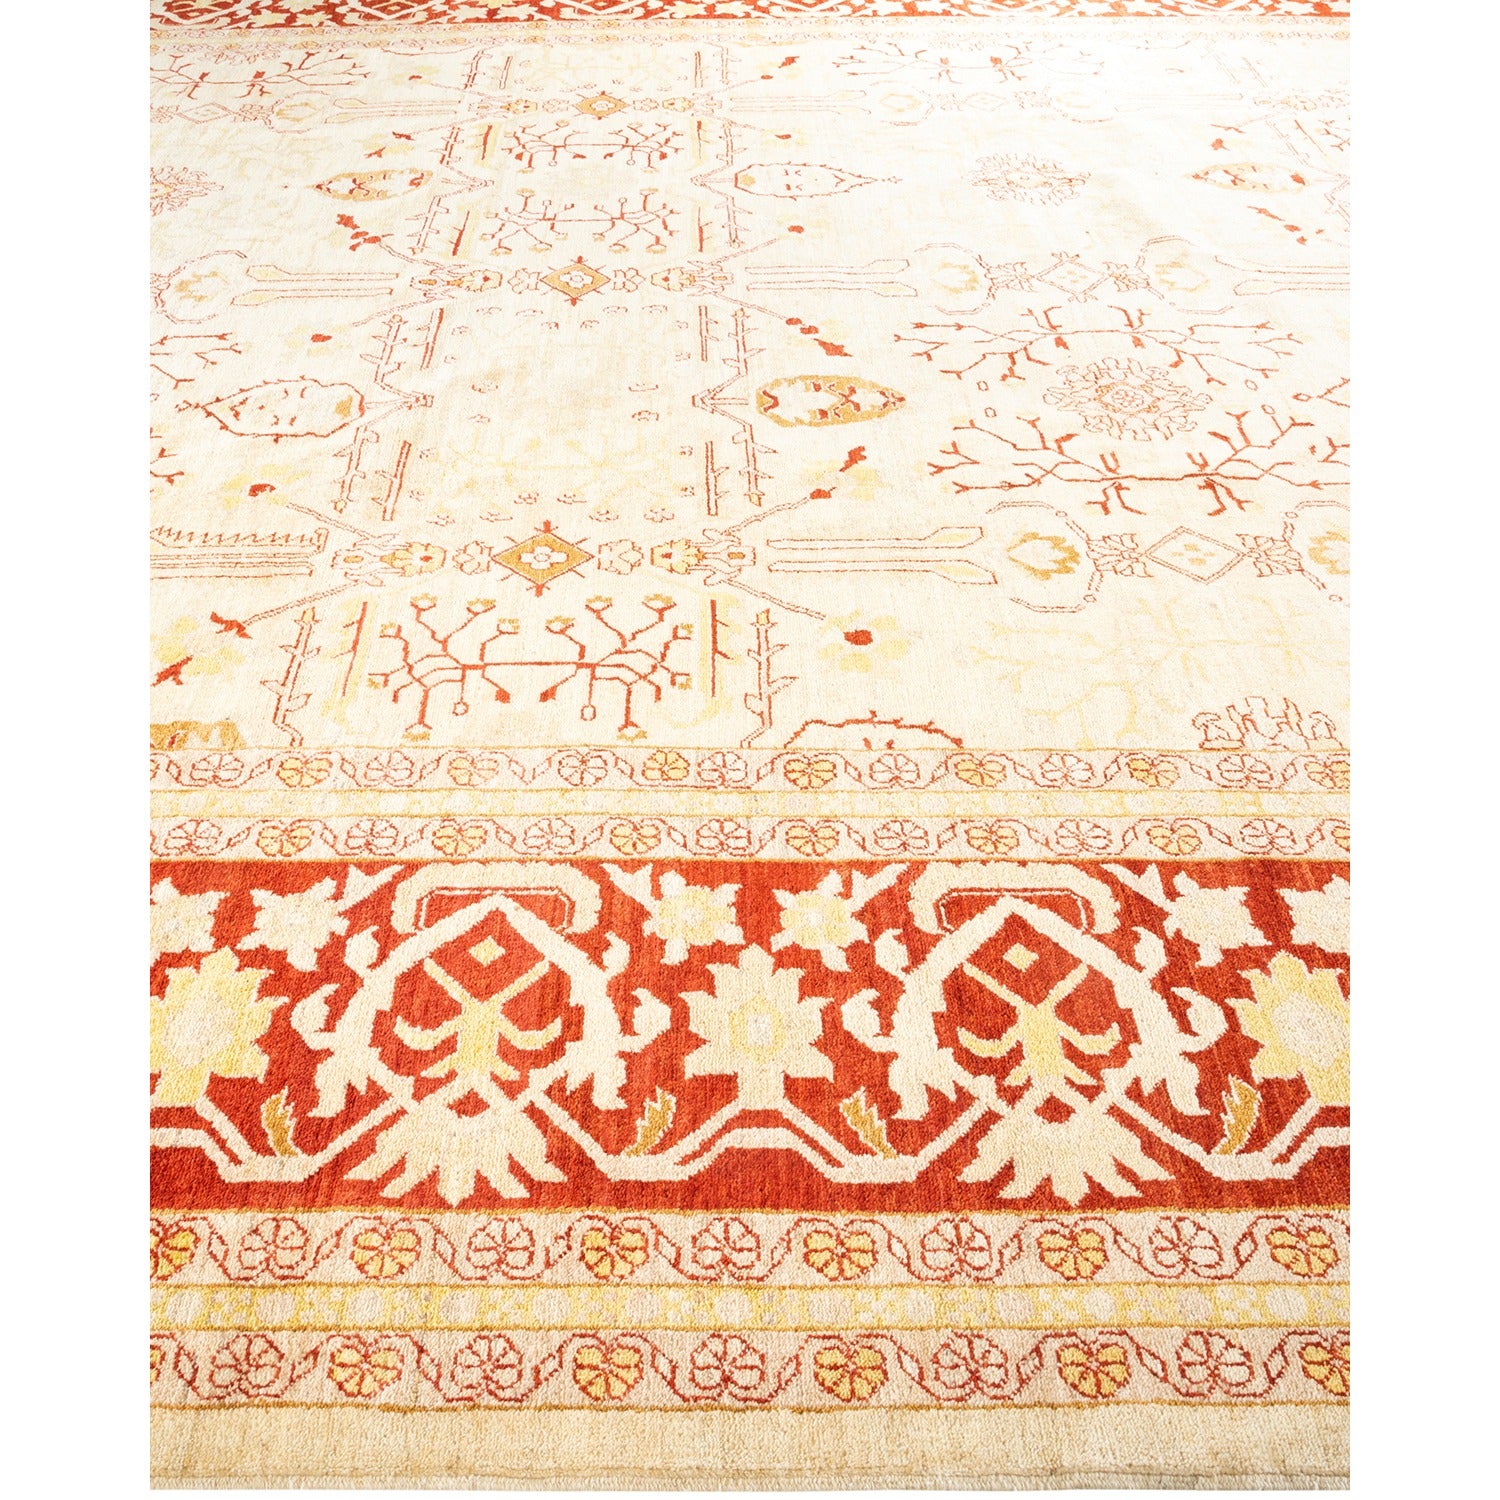 Ornate Persian carpet with intricate floral motifs and warm colors.